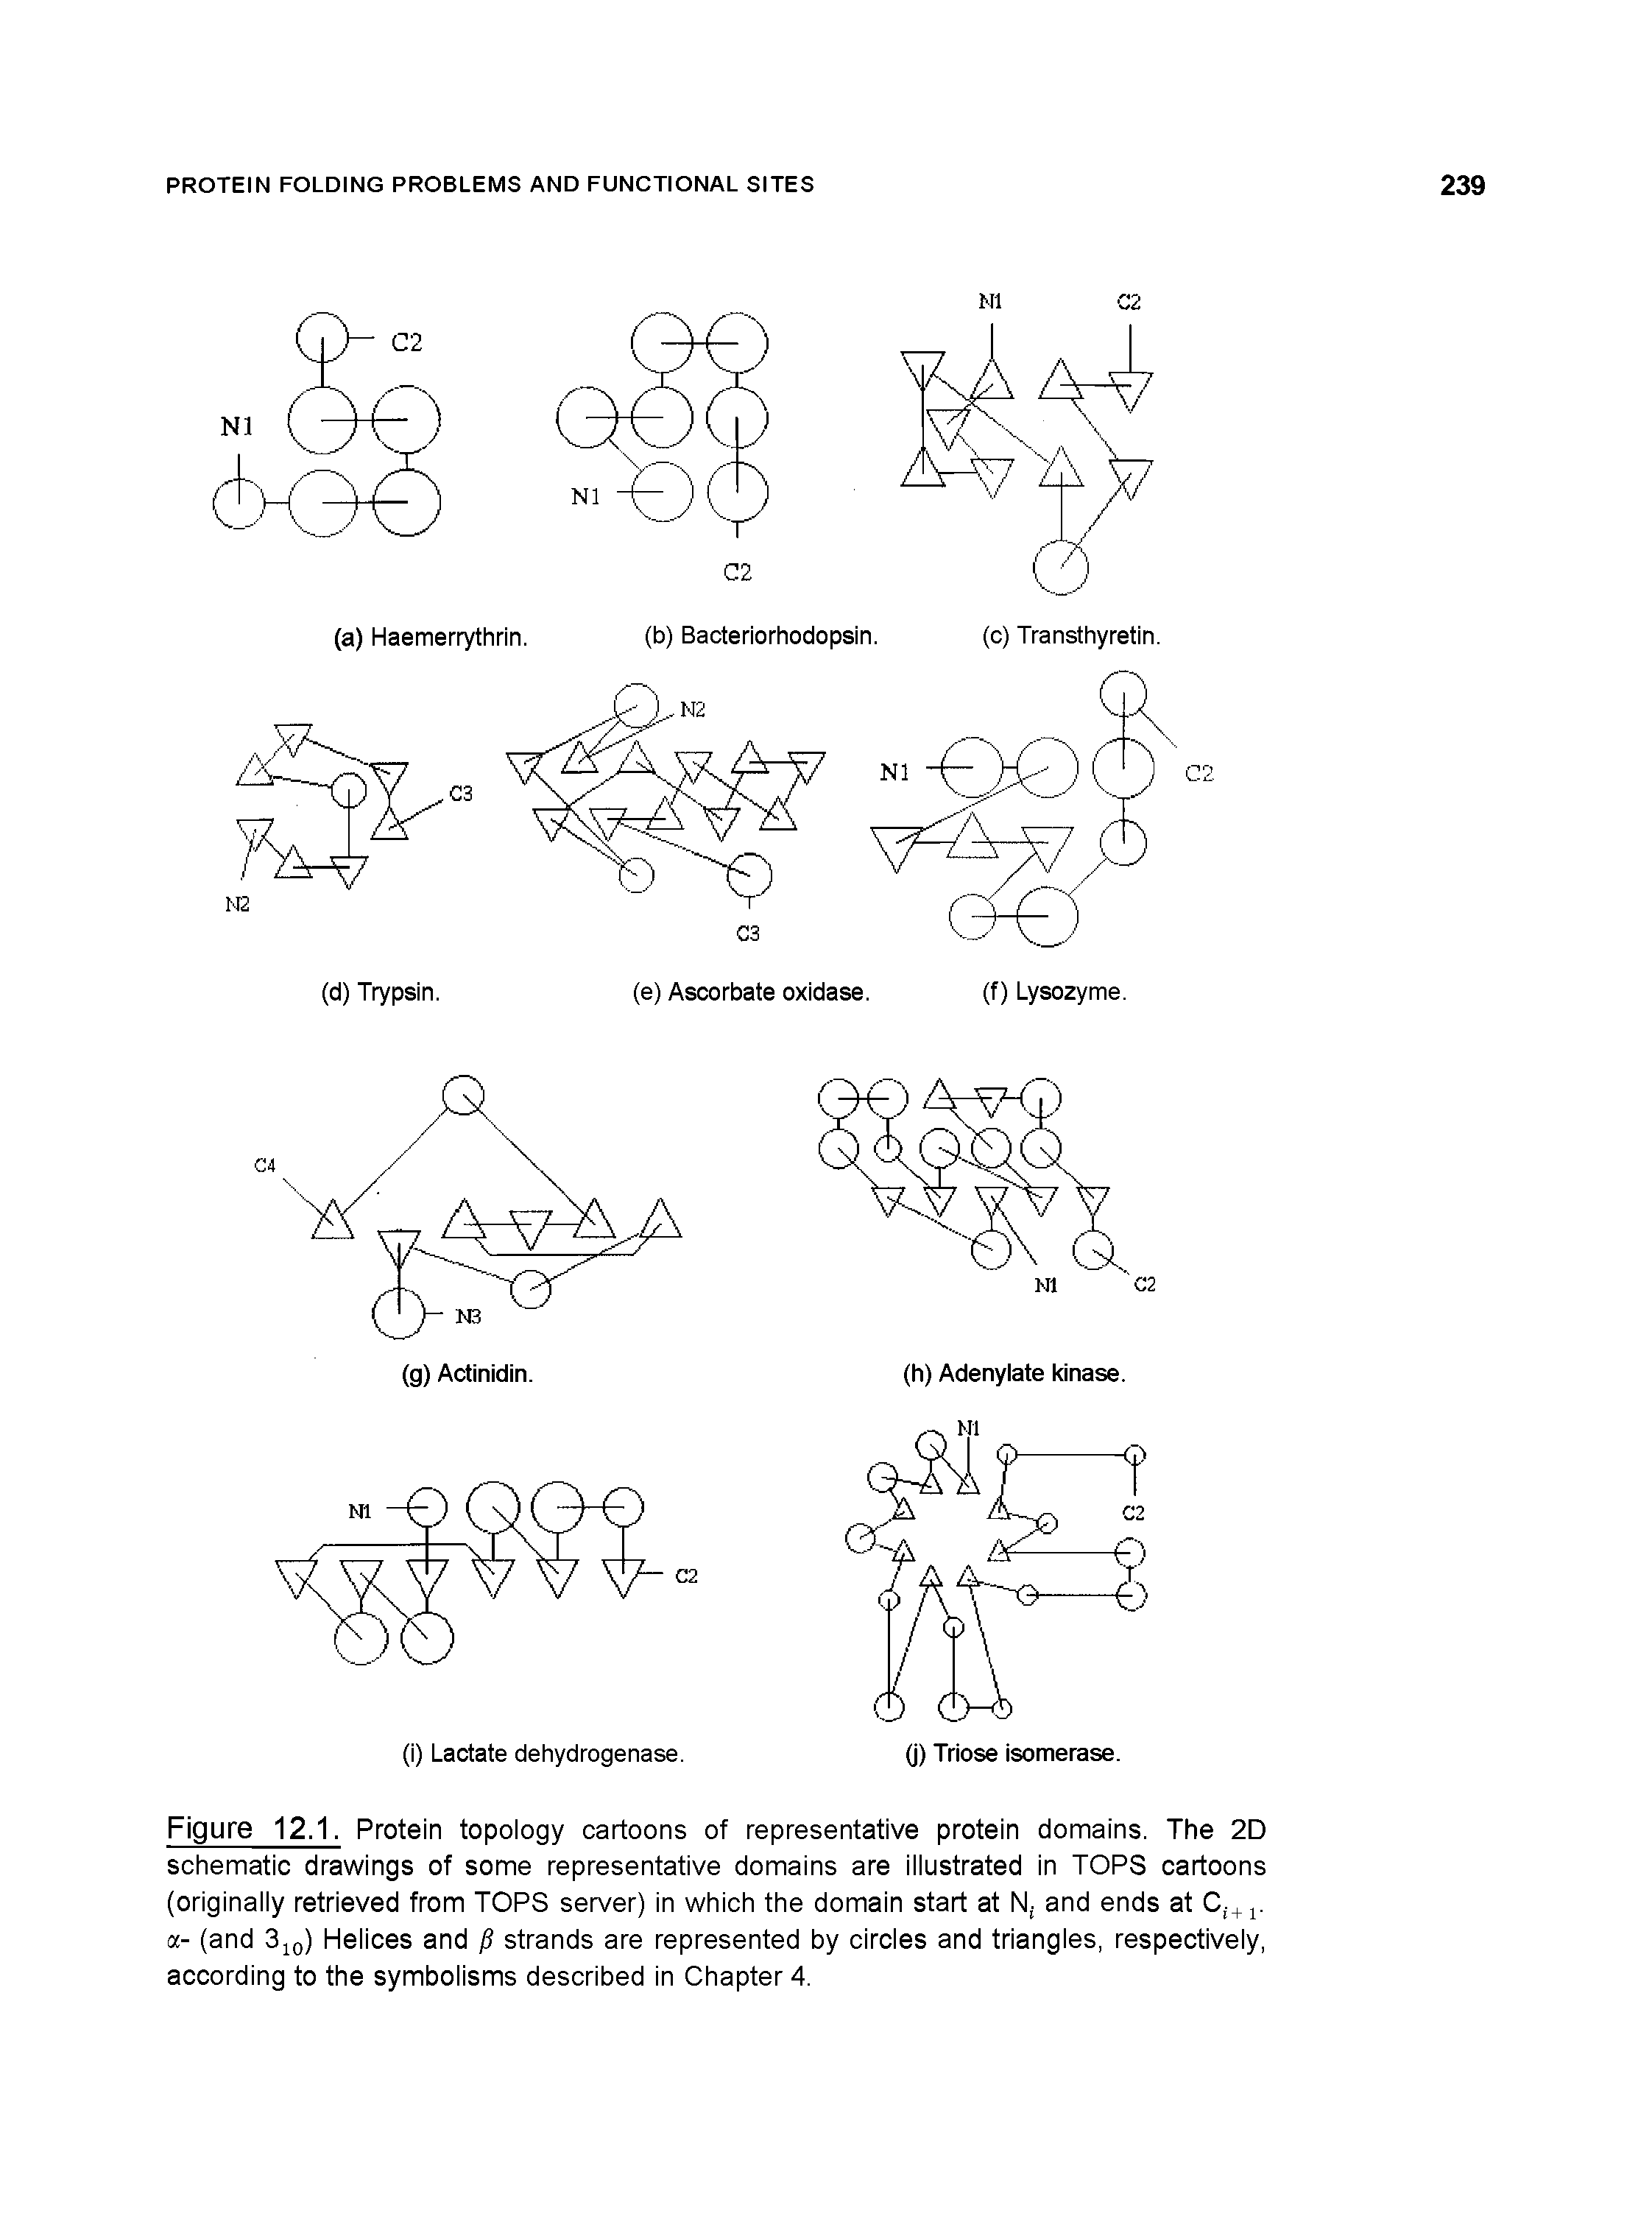 Figure 12.1. Protein topology cartoons of representative protein domains. The 2D schematic drawings of some representative domains are illustrated in TOPS cartoons (originally retrieved from TOPS server) in which the domain start at N and ends at Ci+1. a- (and 310) Helices and / strands are represented by circles and triangles, respectively, according to the symbolisms described in Chapter 4.